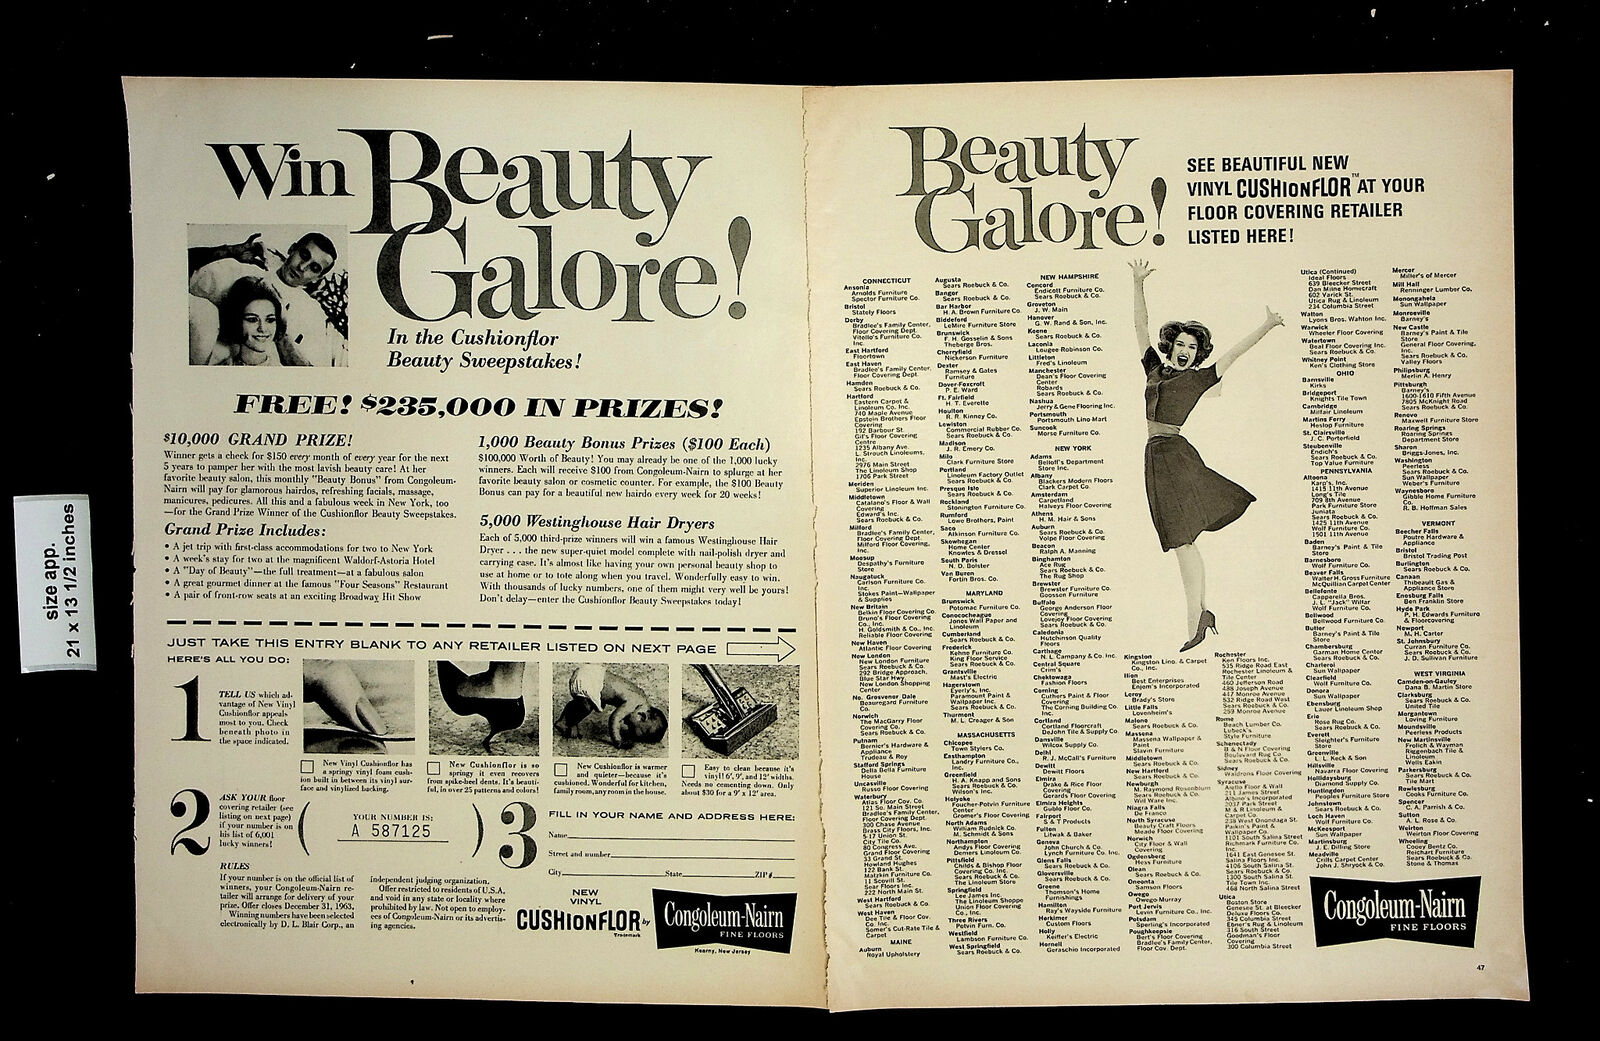 1963 Congoleum-Nairn Beauty Galore Sweepstake Cushionflor Vintage Print Ad 23728